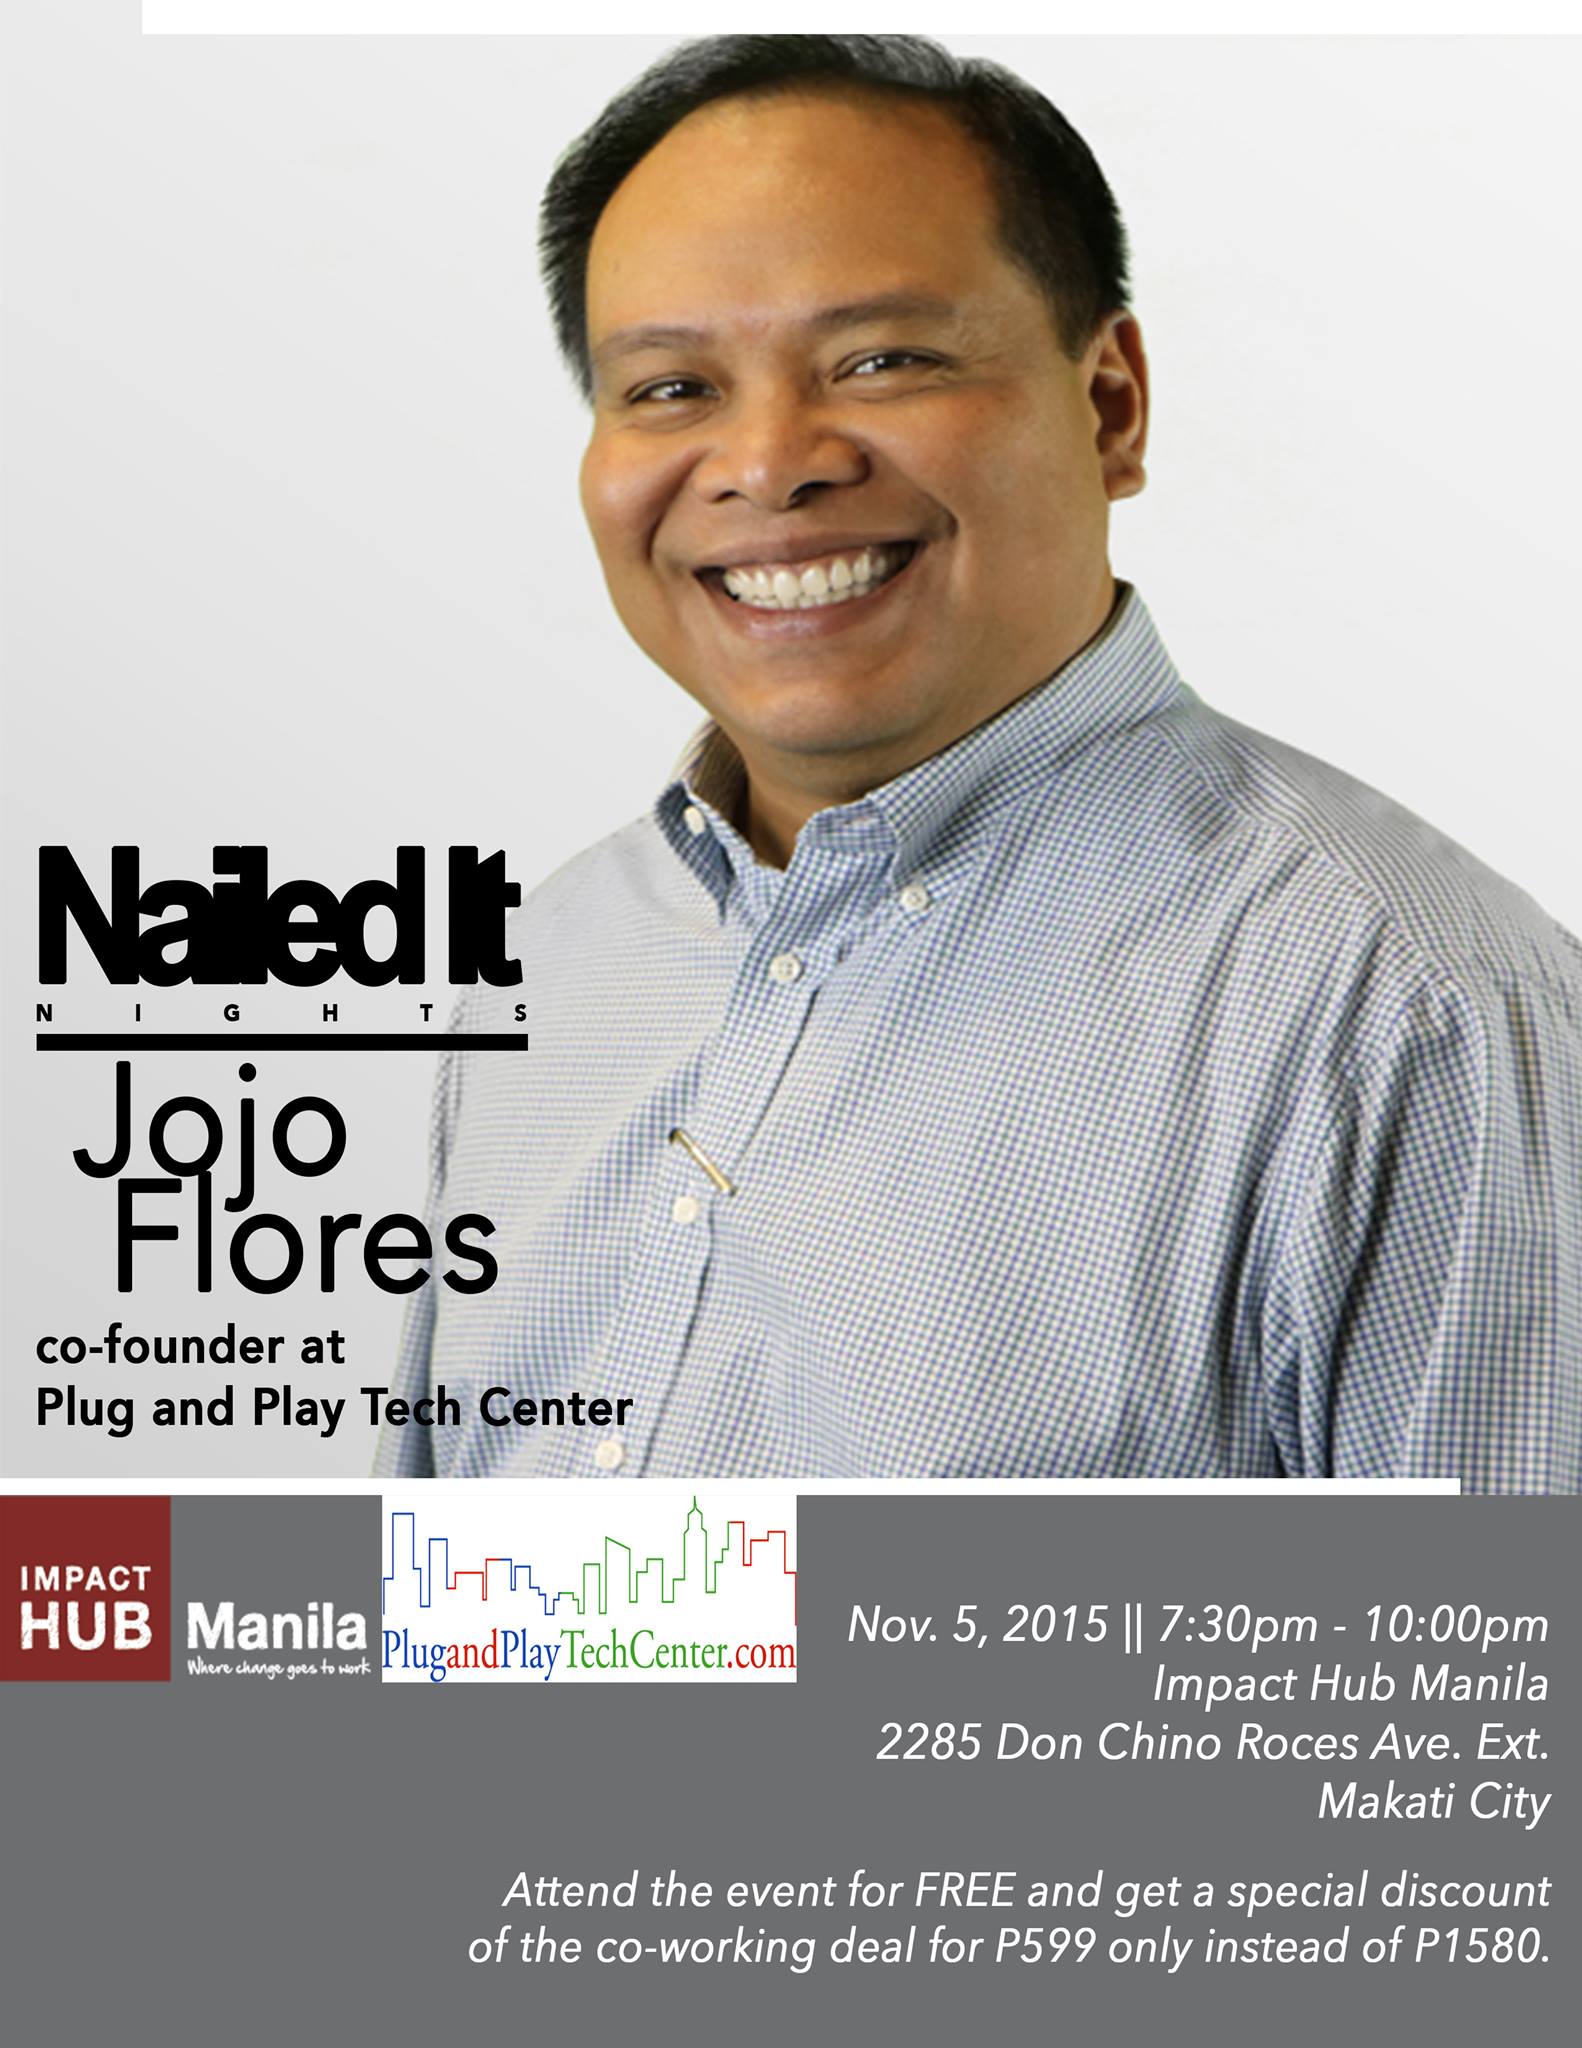 Nailed It Night Thursday, November 5 at 7:30pm 2 days from now · 92°F / 75°F Partly Cloudy Show Map Impact Hub Manila 2285 Chino Roces Avenue Extension, 5th FLOOR Green Sun, 1231 Makati, Philippines Find Tickets Tickets Available www.eventbrite.com More Events By Impact Hub Manila NOV 03 Business Plan Writing Workshop Impact Hub Manila in Makati, Philippines Mathias Matt Jaeggi is going NOV 26 FUCK UP NIGHT VOL. VII Impact Hub Manila in Makati, Philippines 7 guests DEC 03 Nailed It Night Impact Hub Manila in Makati, Philippines 4 guests ADMISSION IS FREE! Don't miss this opportunity by signing up: https://www.eventbrite.com/e/nailed-it-night-tickets-19241615189 If you will be going to Nailed It Night, you will be able to receive a BONUS! Enjoy our Special Coworking Deal on event day P599 (instead P1,580) - we open at 9am. Recognizing the outstanding talent and awesome enterprises that we have in our community, Impact Hub Manila opens its doors as an avenue for them to tell their stories and share how they grew their businesses to a success. Whether you’re an aspiring entrepreneur wanting more insights about how to grow a business successfully, or a current business owner looking to get in depth information from our rockstar industry leaders, Nailed It Night is a must-attend event for you! What is Coworking? Coworking is an open work space that fosters collaboration among individuals and groups of people who wants to create positive change. What is Impact Hub? Impact Hub Manila provides a space where entrepreneurs and all kinds of innovators can come together to prototype new models for a world that works for all - connecting all sectors, industries and cultural backgrounds. It offers access to inspiring work spaces, a vibrant learning community, startup incubation programs, corporate innovation workshops and entrepreneur